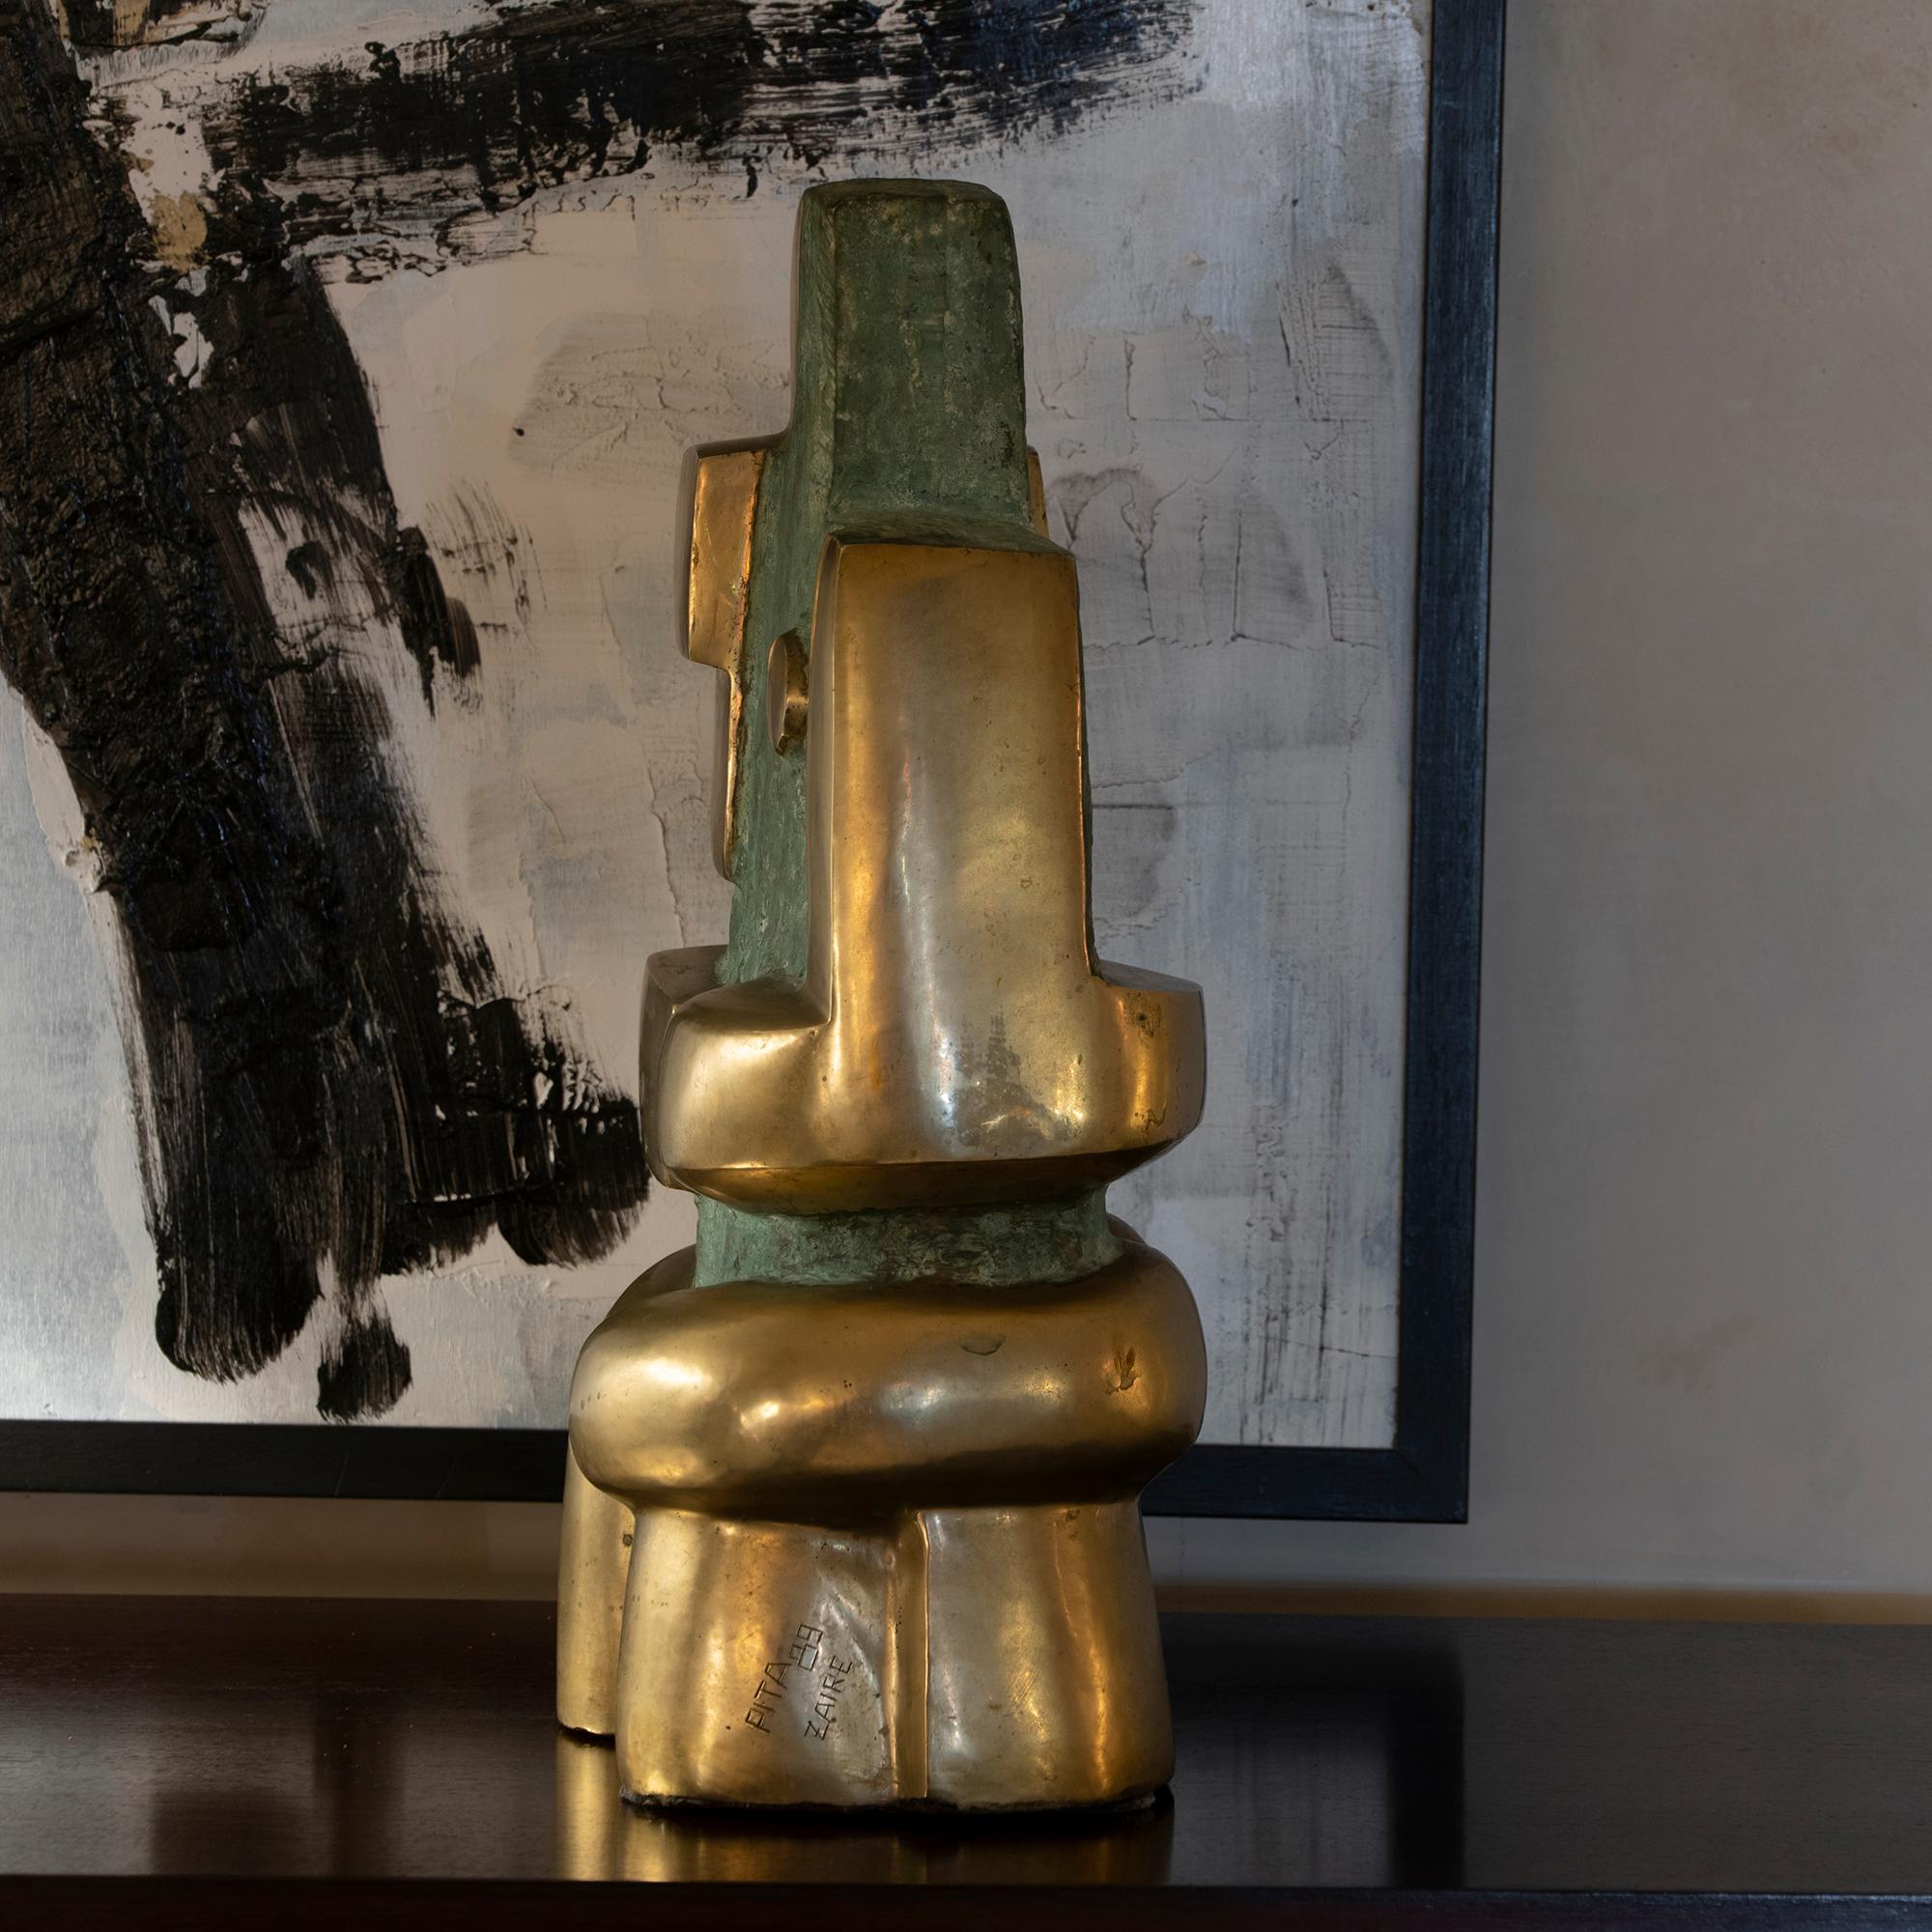 Polished bronze abstract sculpture, realized by the congolese african artist François Tamba Ndembe (1942-2006), Master of humility and contestation he contributed to the construction of a vision of a resolutely modern sculpture but anchored in the